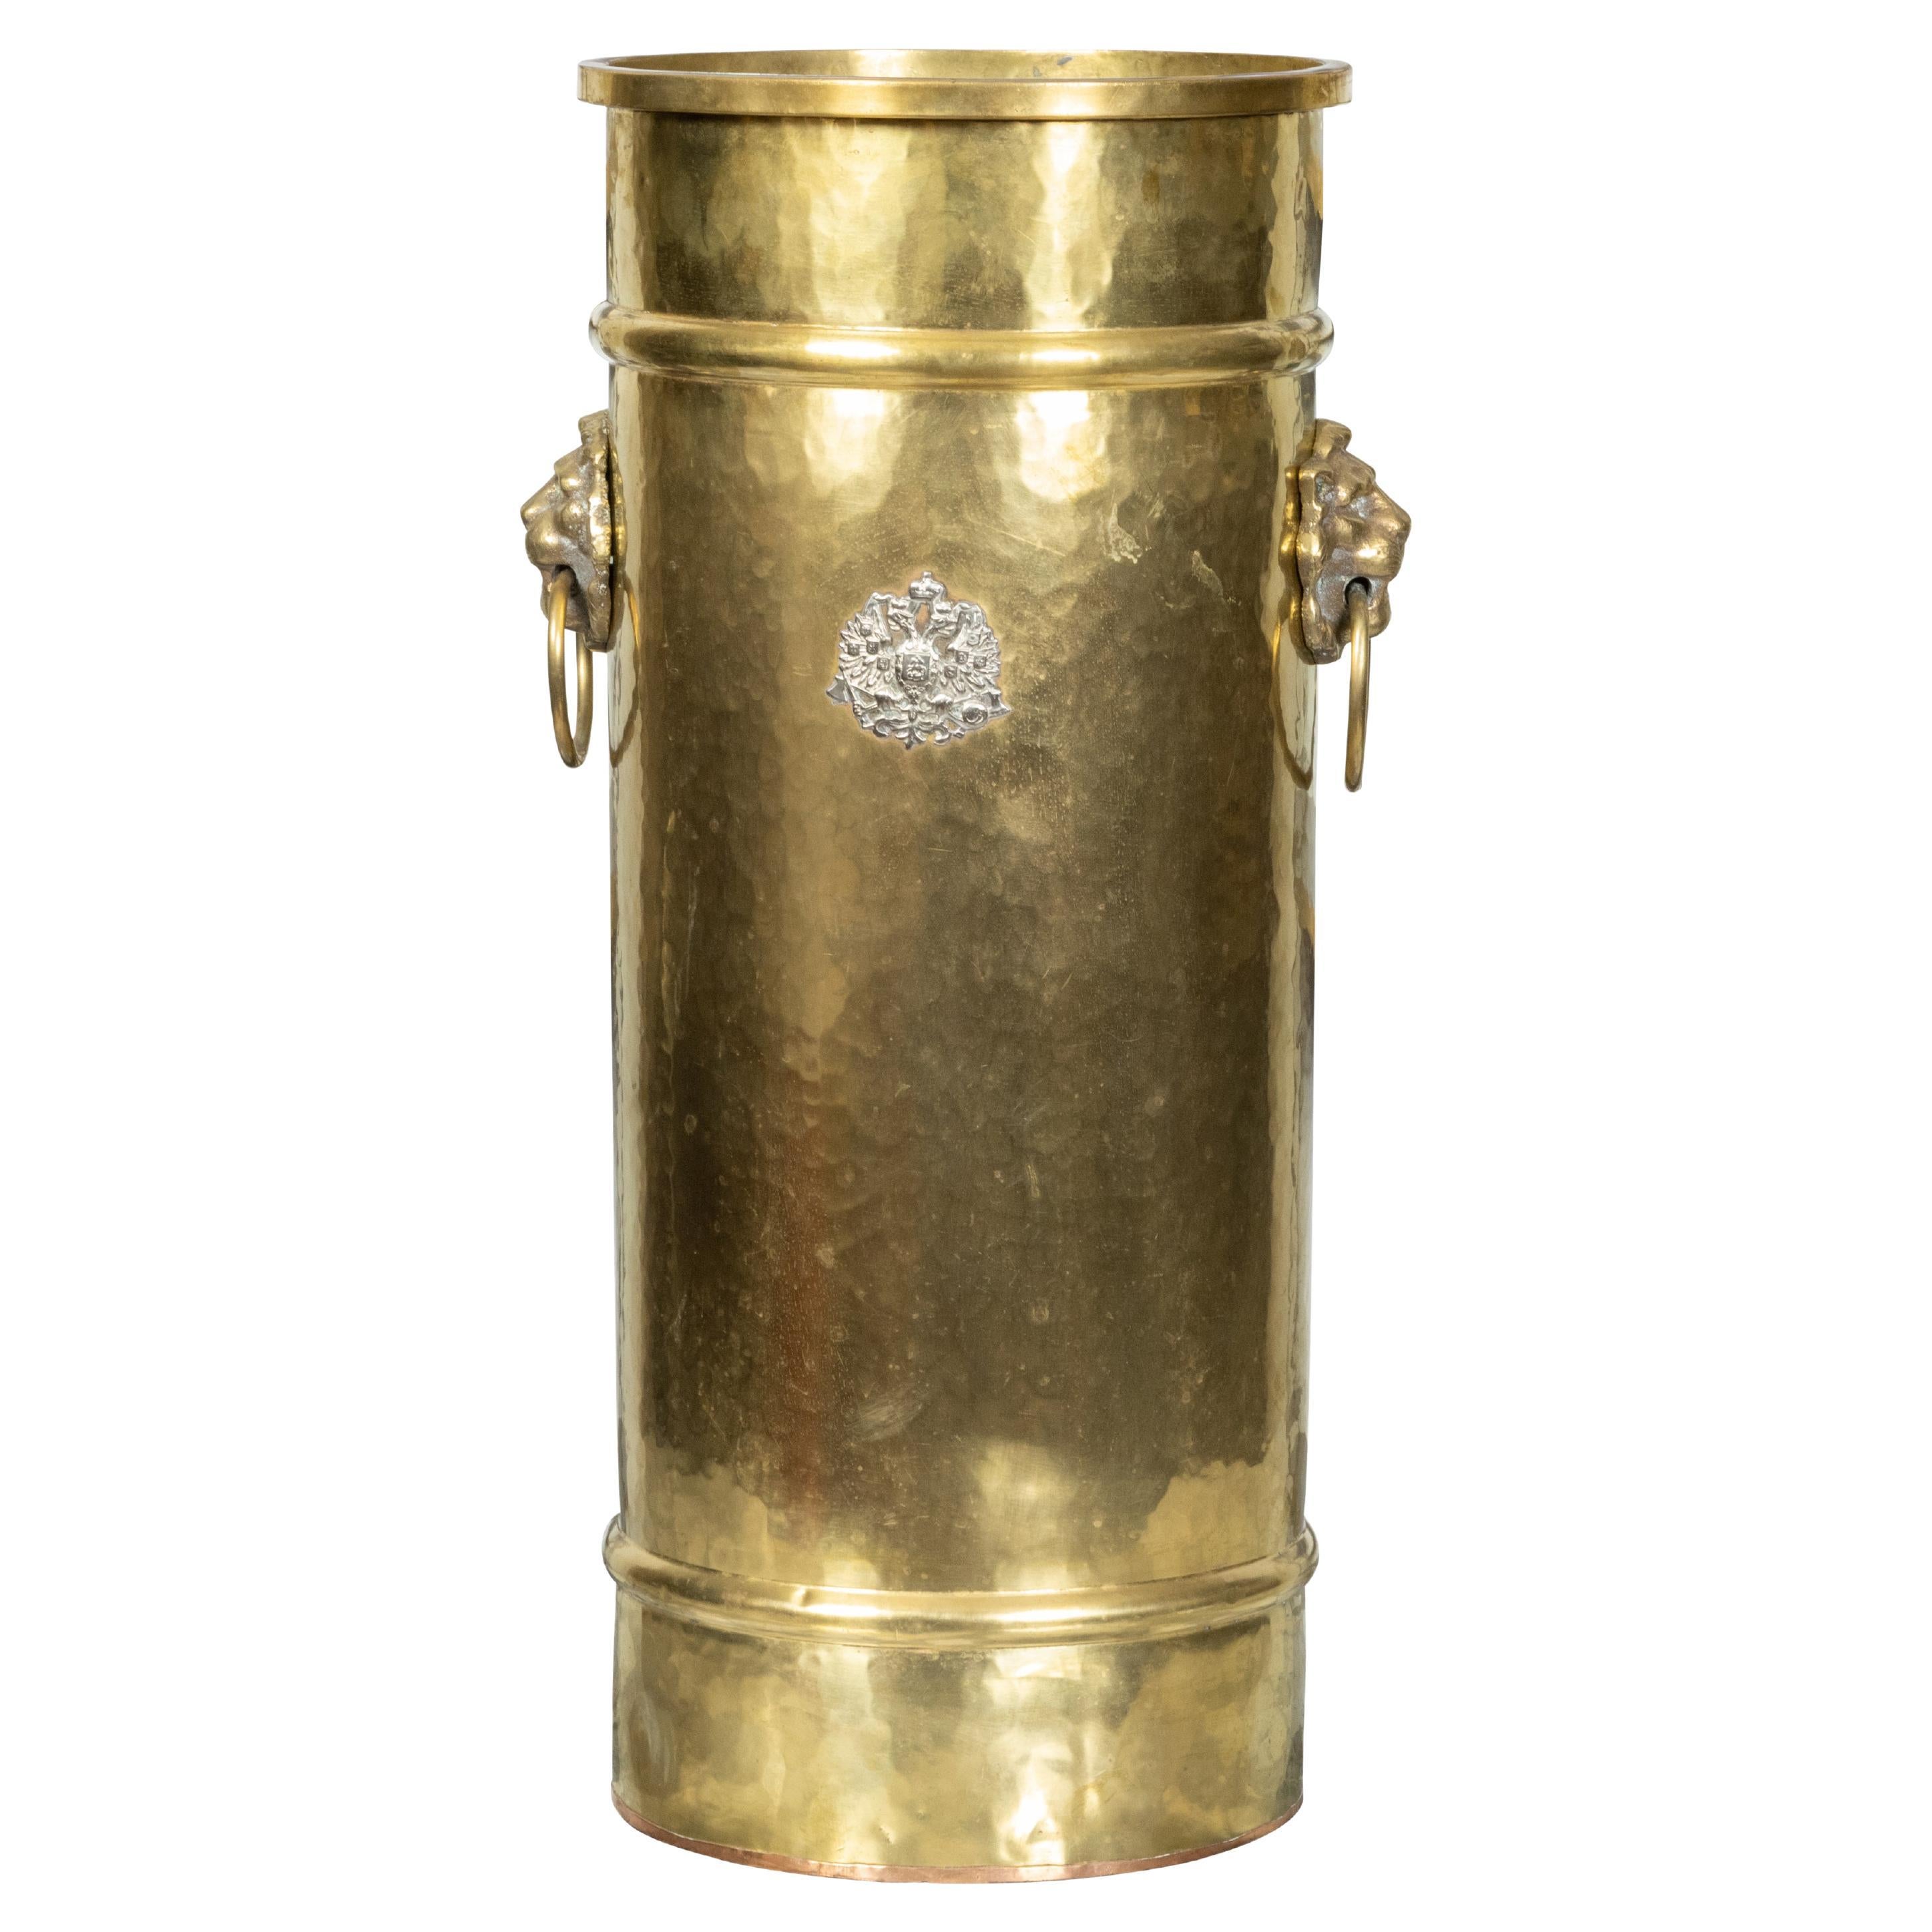 English 1920s Brass Umbrella Stand with Double-Headed Eagle Heraldic Motif